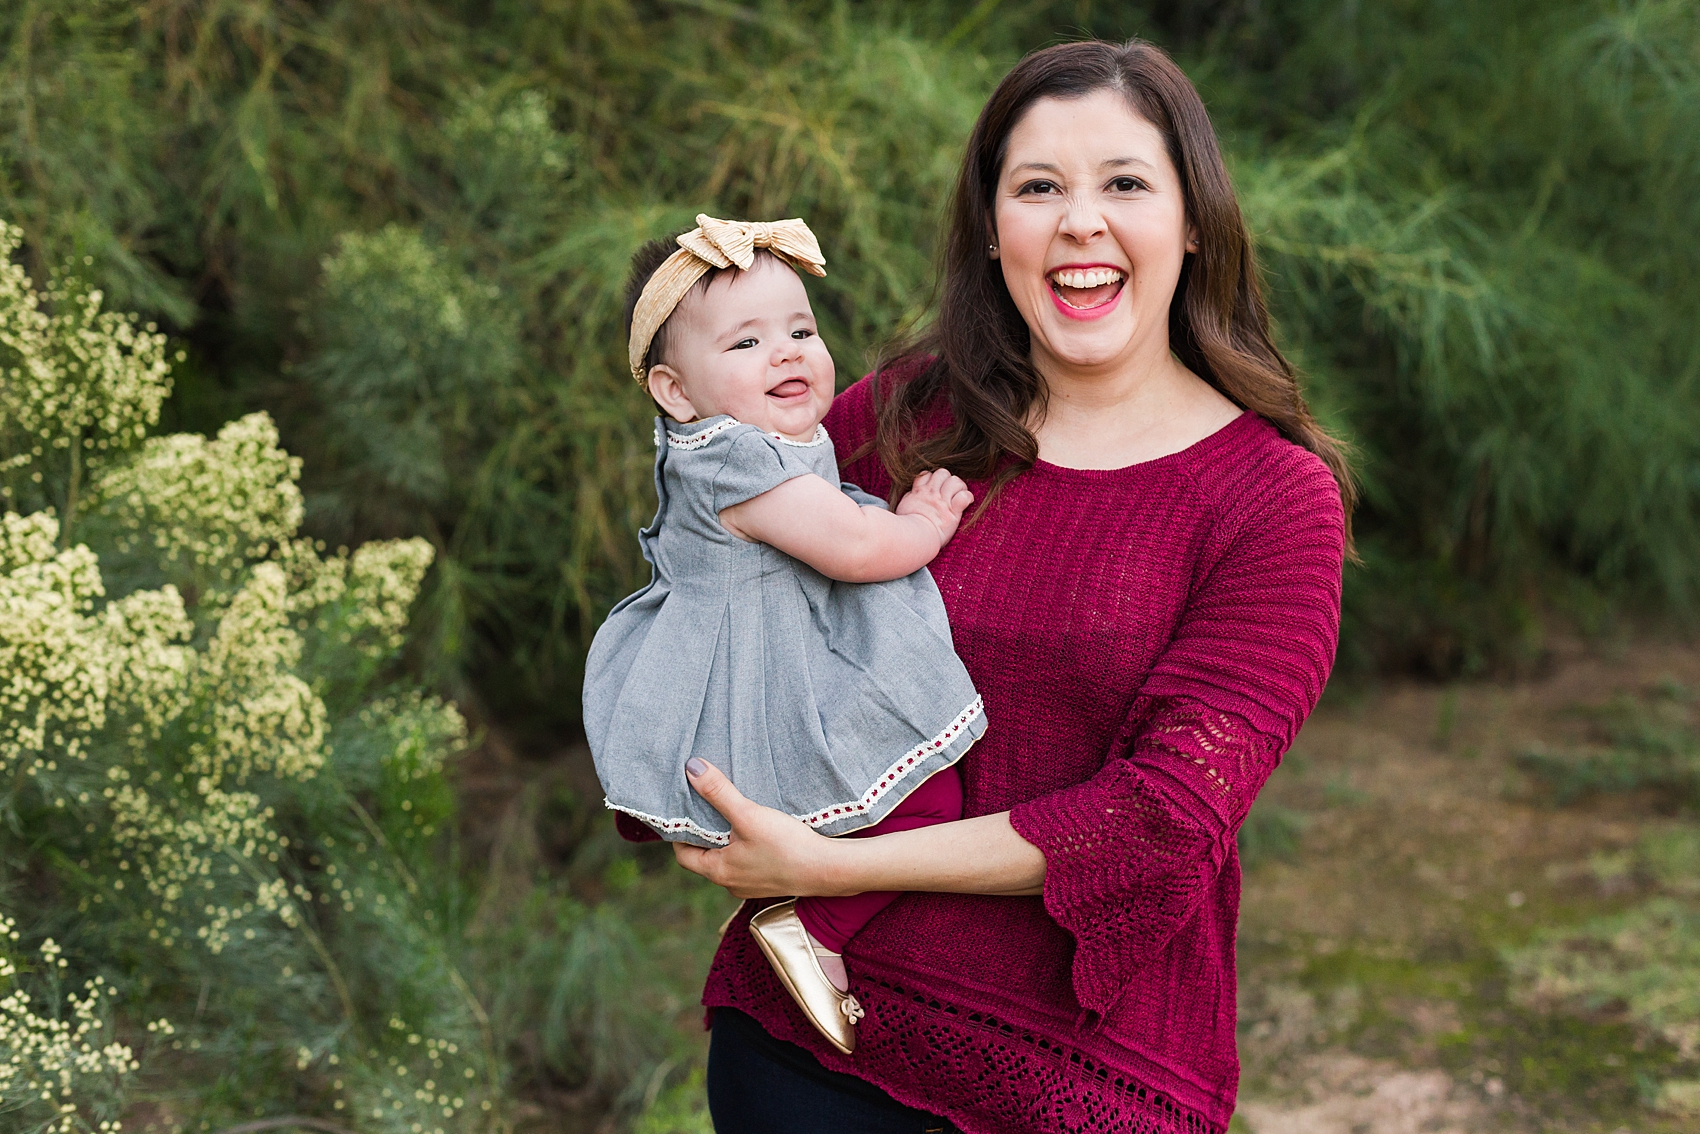 Leah Hope Photography | Scottsdale Phoenix Arizona | Nature Greenery | Family Pictures | Family Poses | Baby Girl | Fall